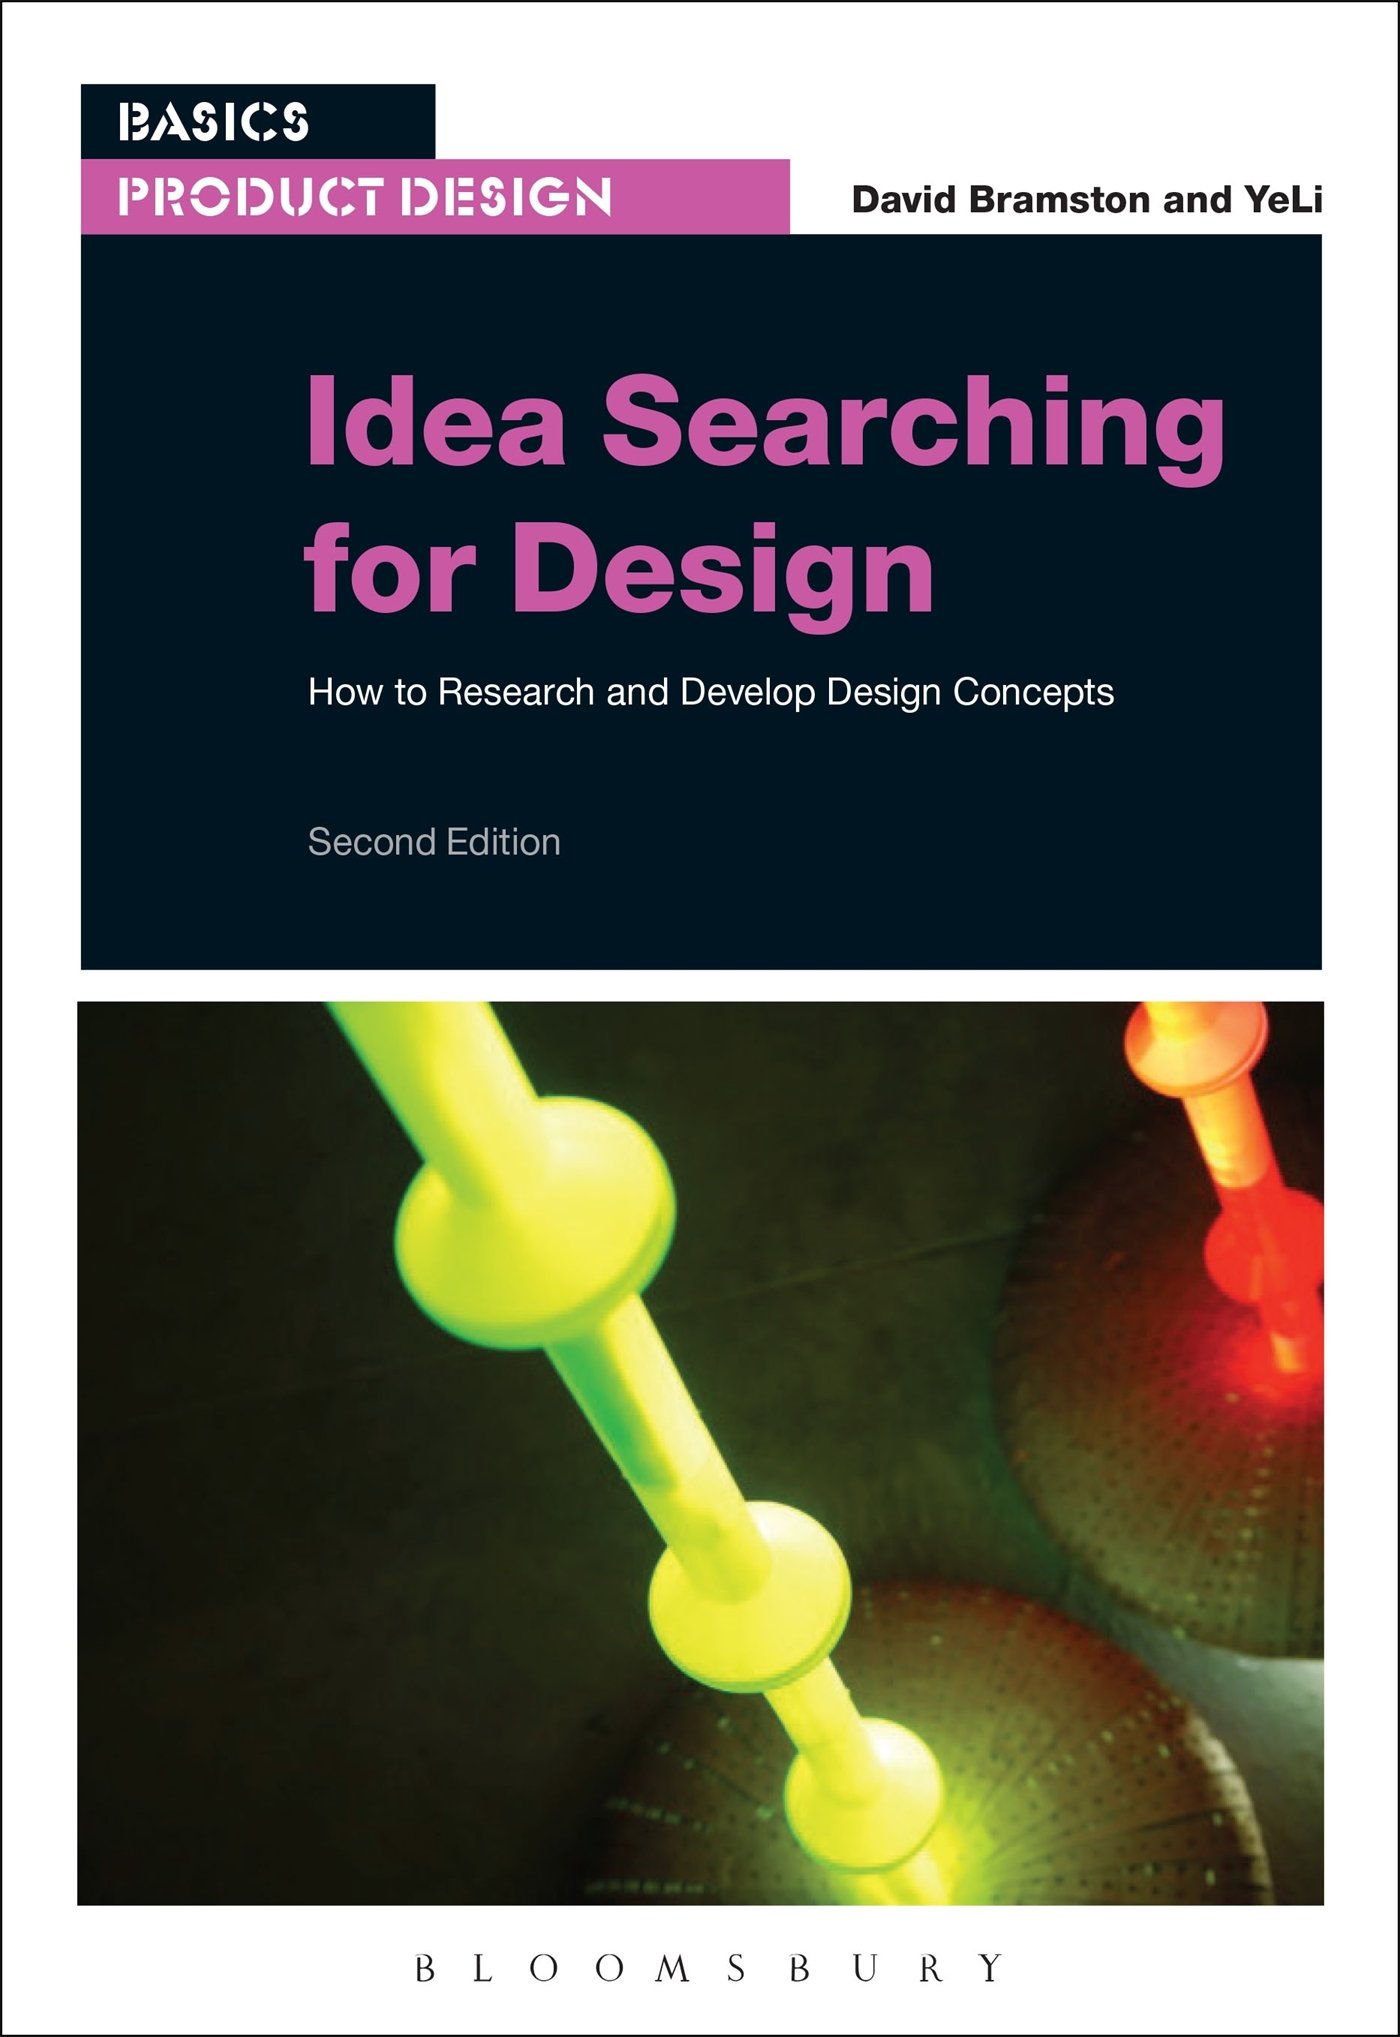 Idea searching for design